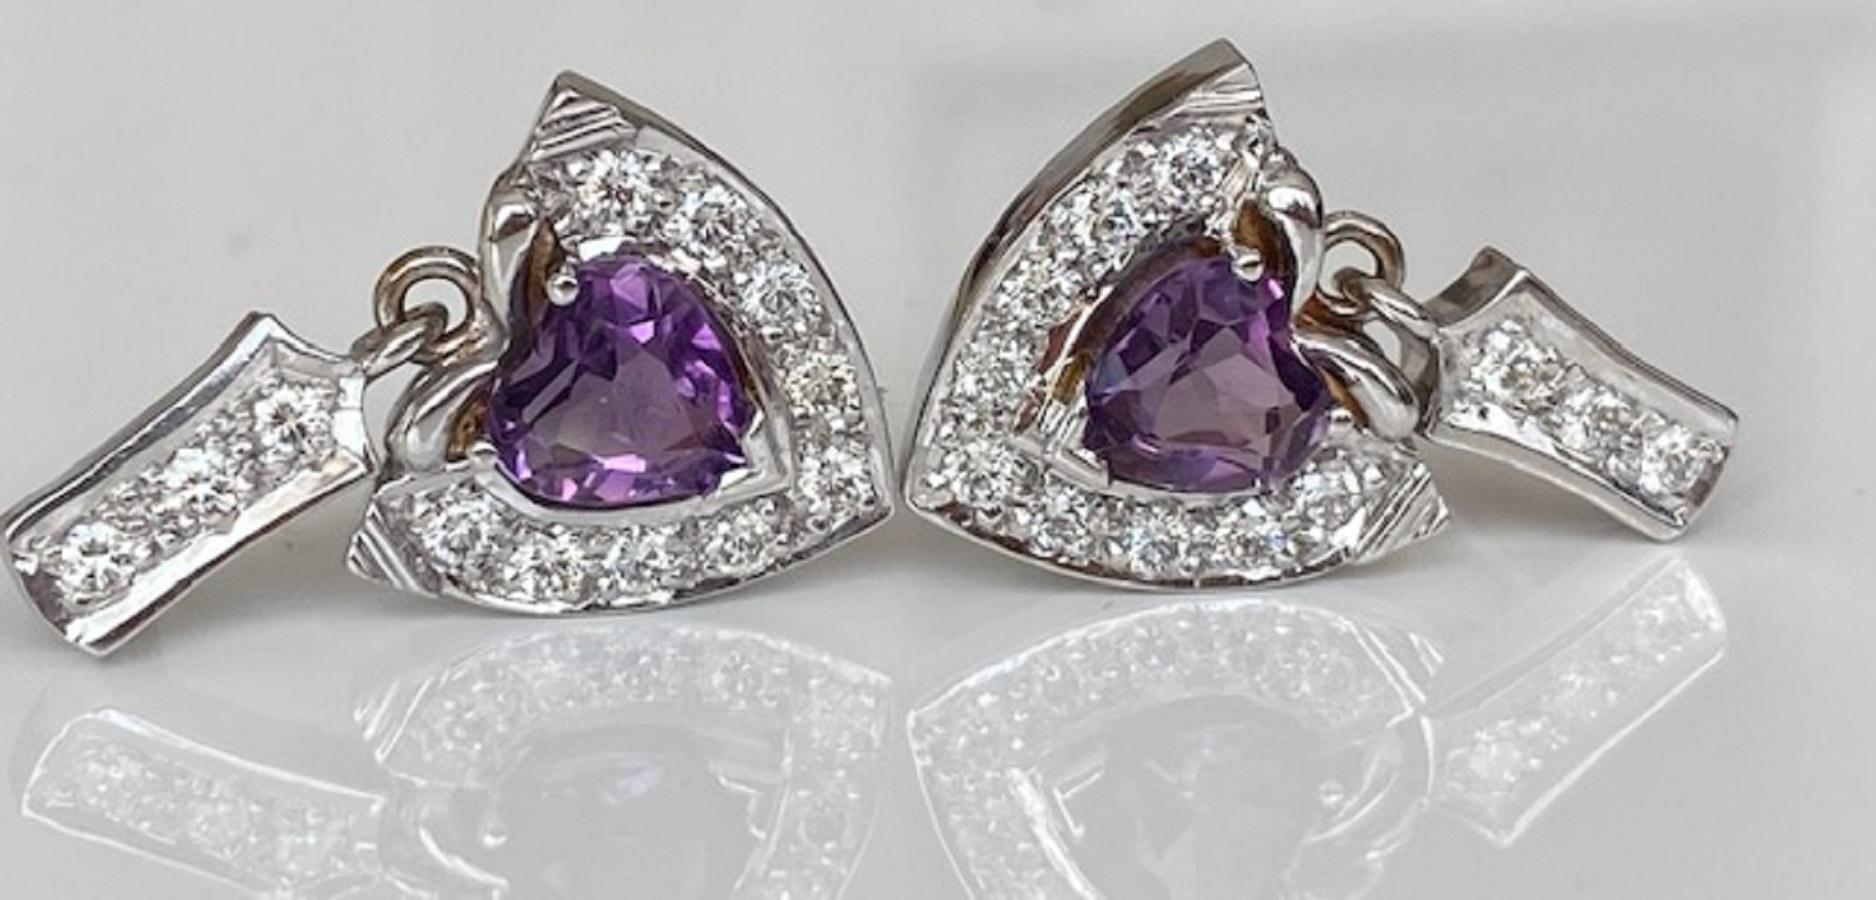 Vintage 18 kt white gold Diamond Dangle earrings studs with Amethyst For Sale 1